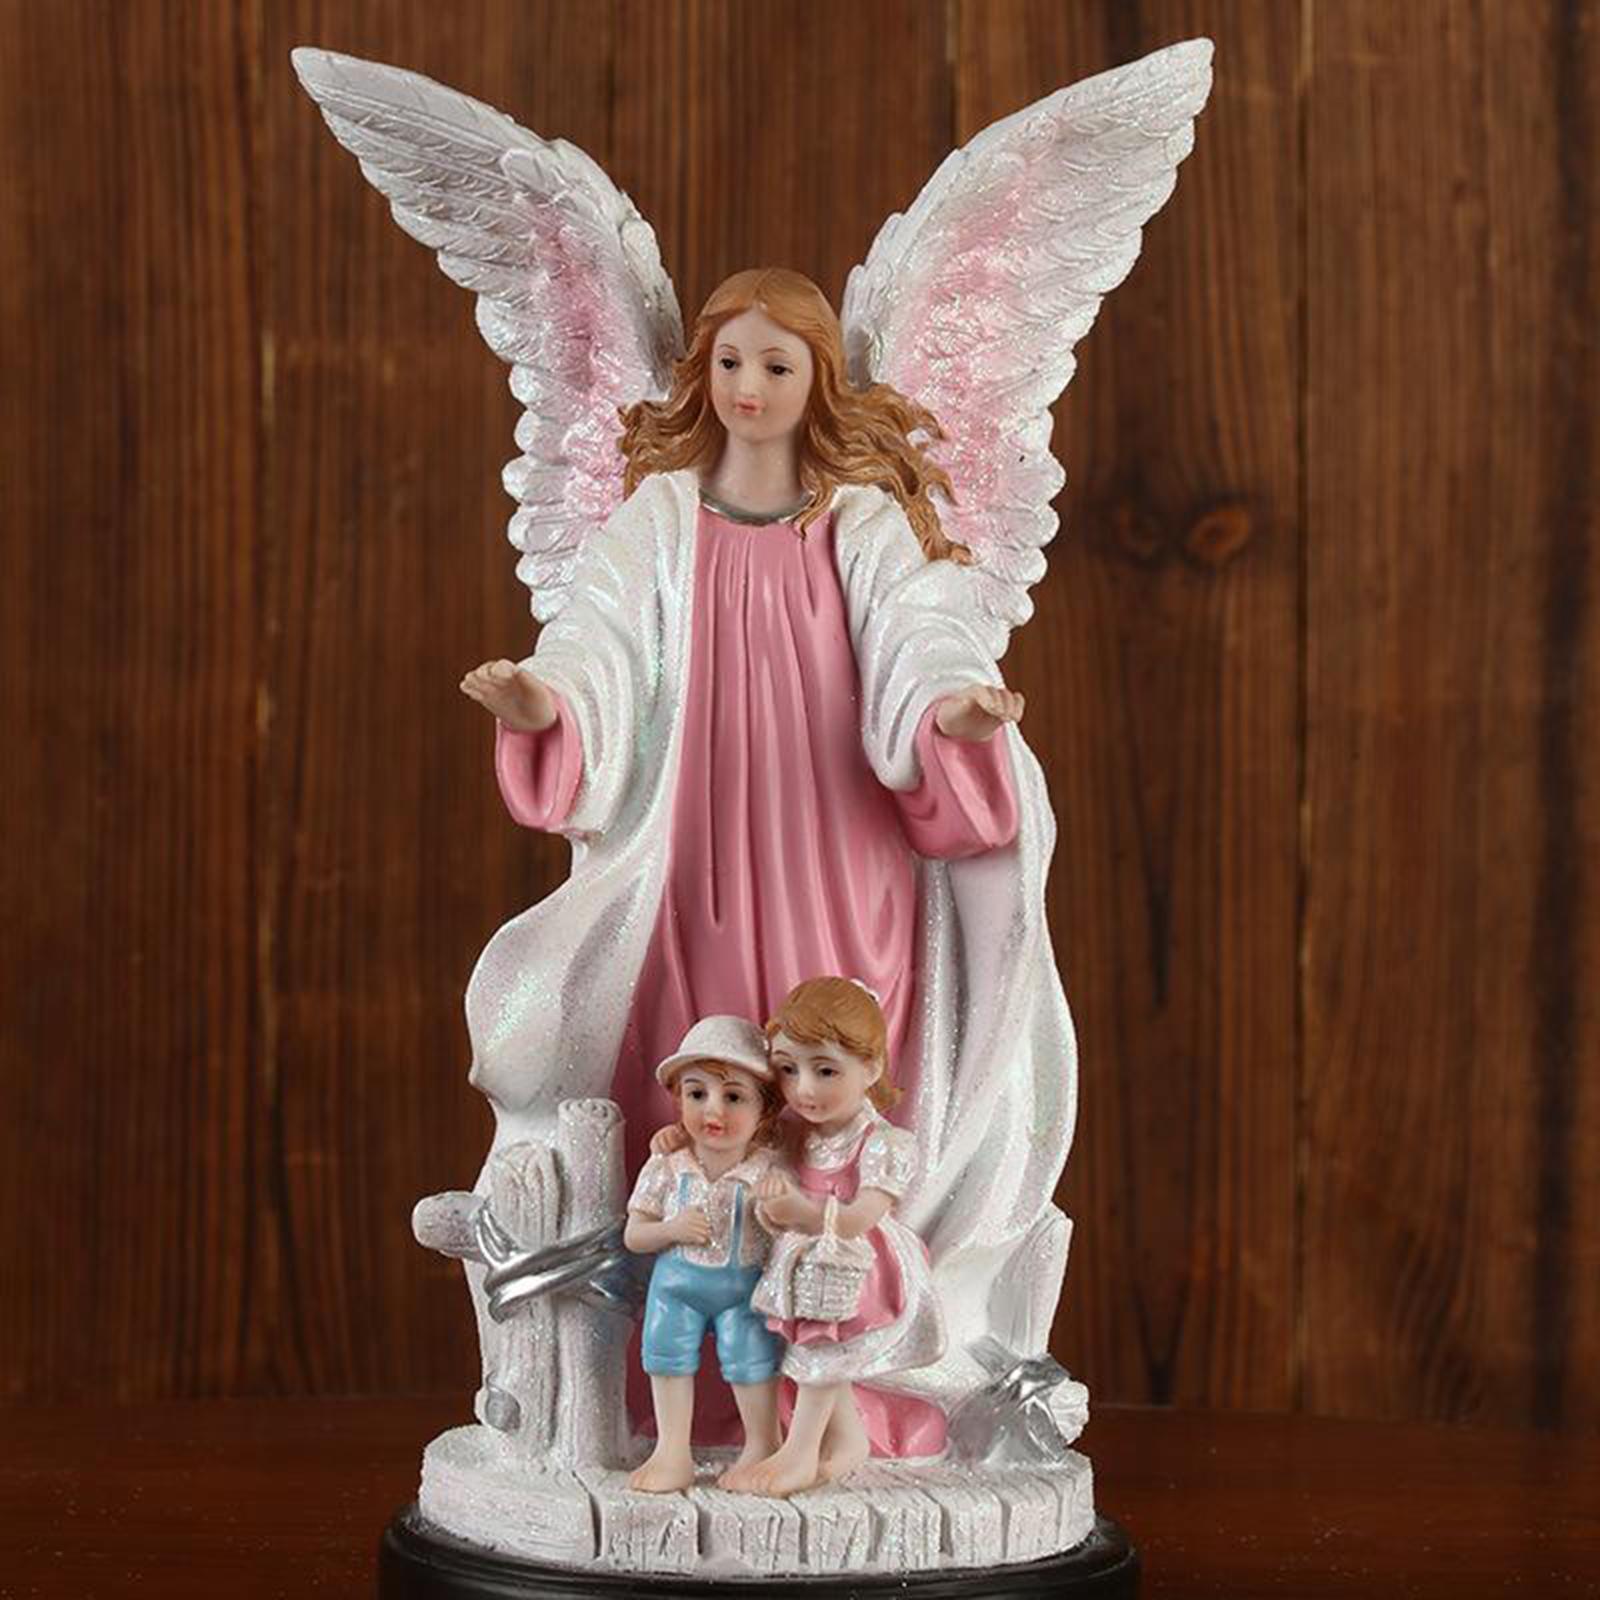 Baby Angel Statue Figurine Religious Collectibles Home Angel Wings Sculpture